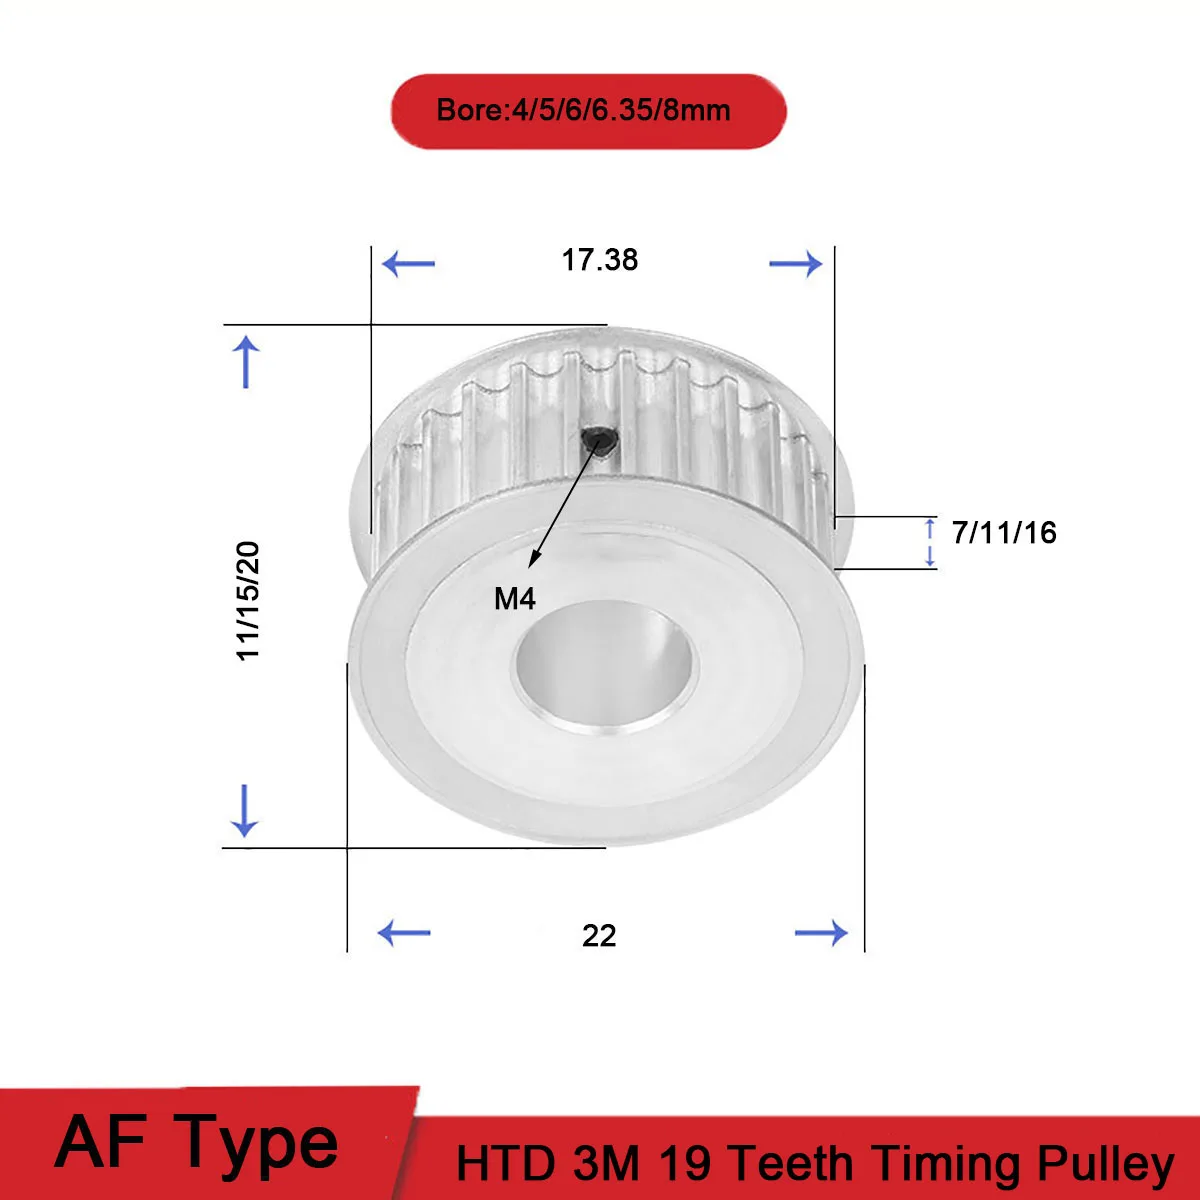 

HTD 3M 19T Timing Pulley Bore 4/5/6/6.35/8mm Gear Pulley 3mm Pitch Teeth Width 7/11/16mm Aluminum Synchronous Timing Belt Pulley